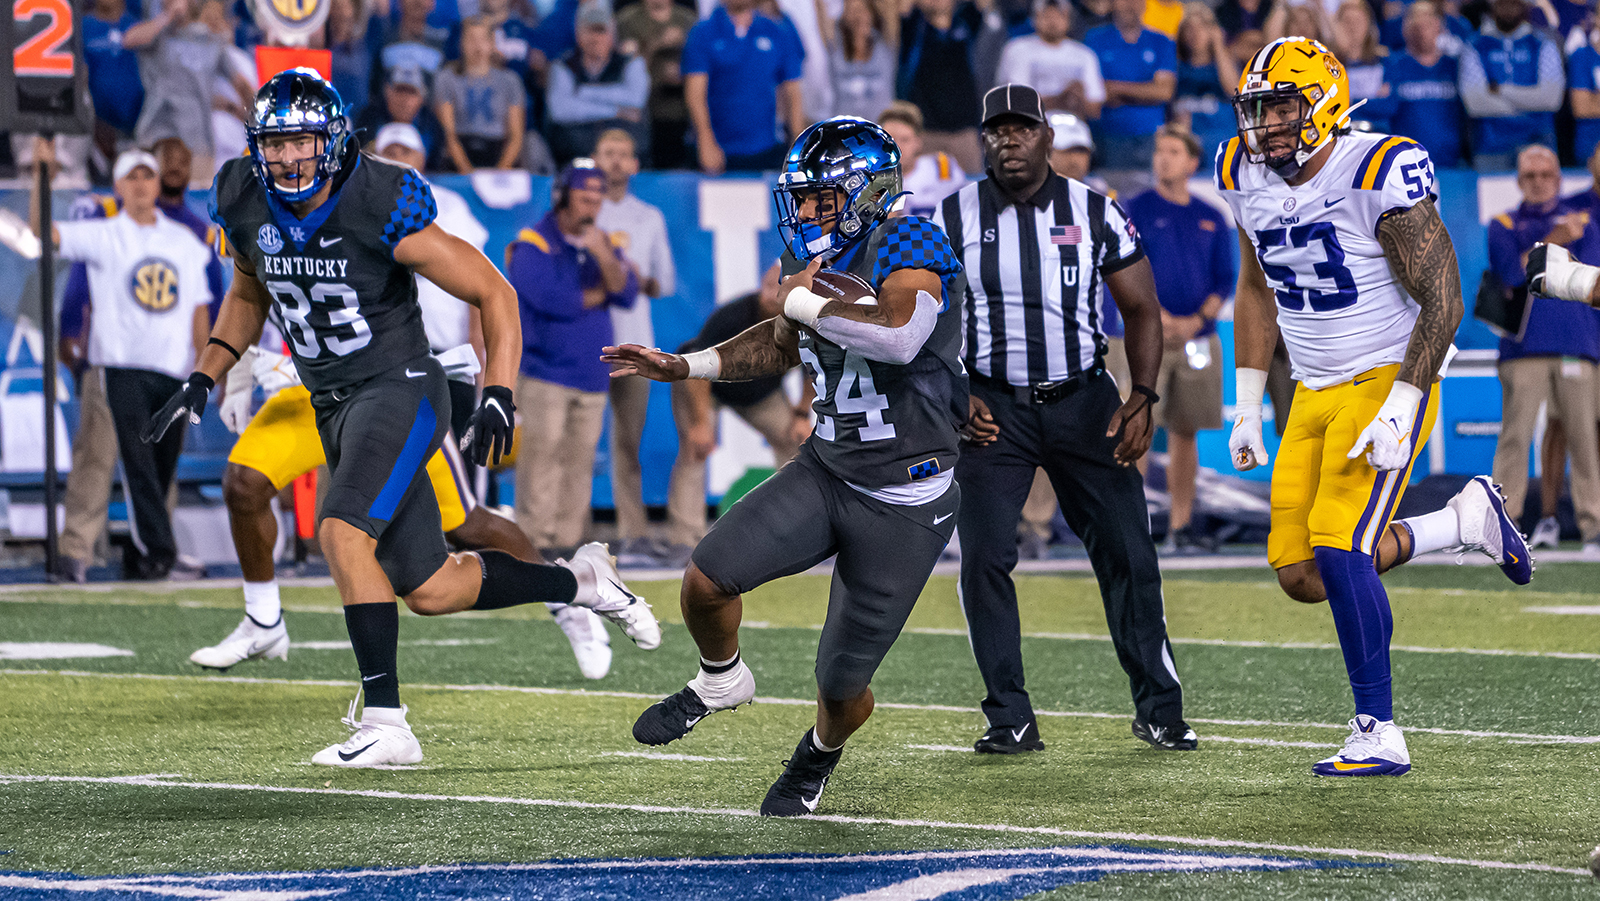 'Quiet Confidence' Helps Cats Move to 6-0